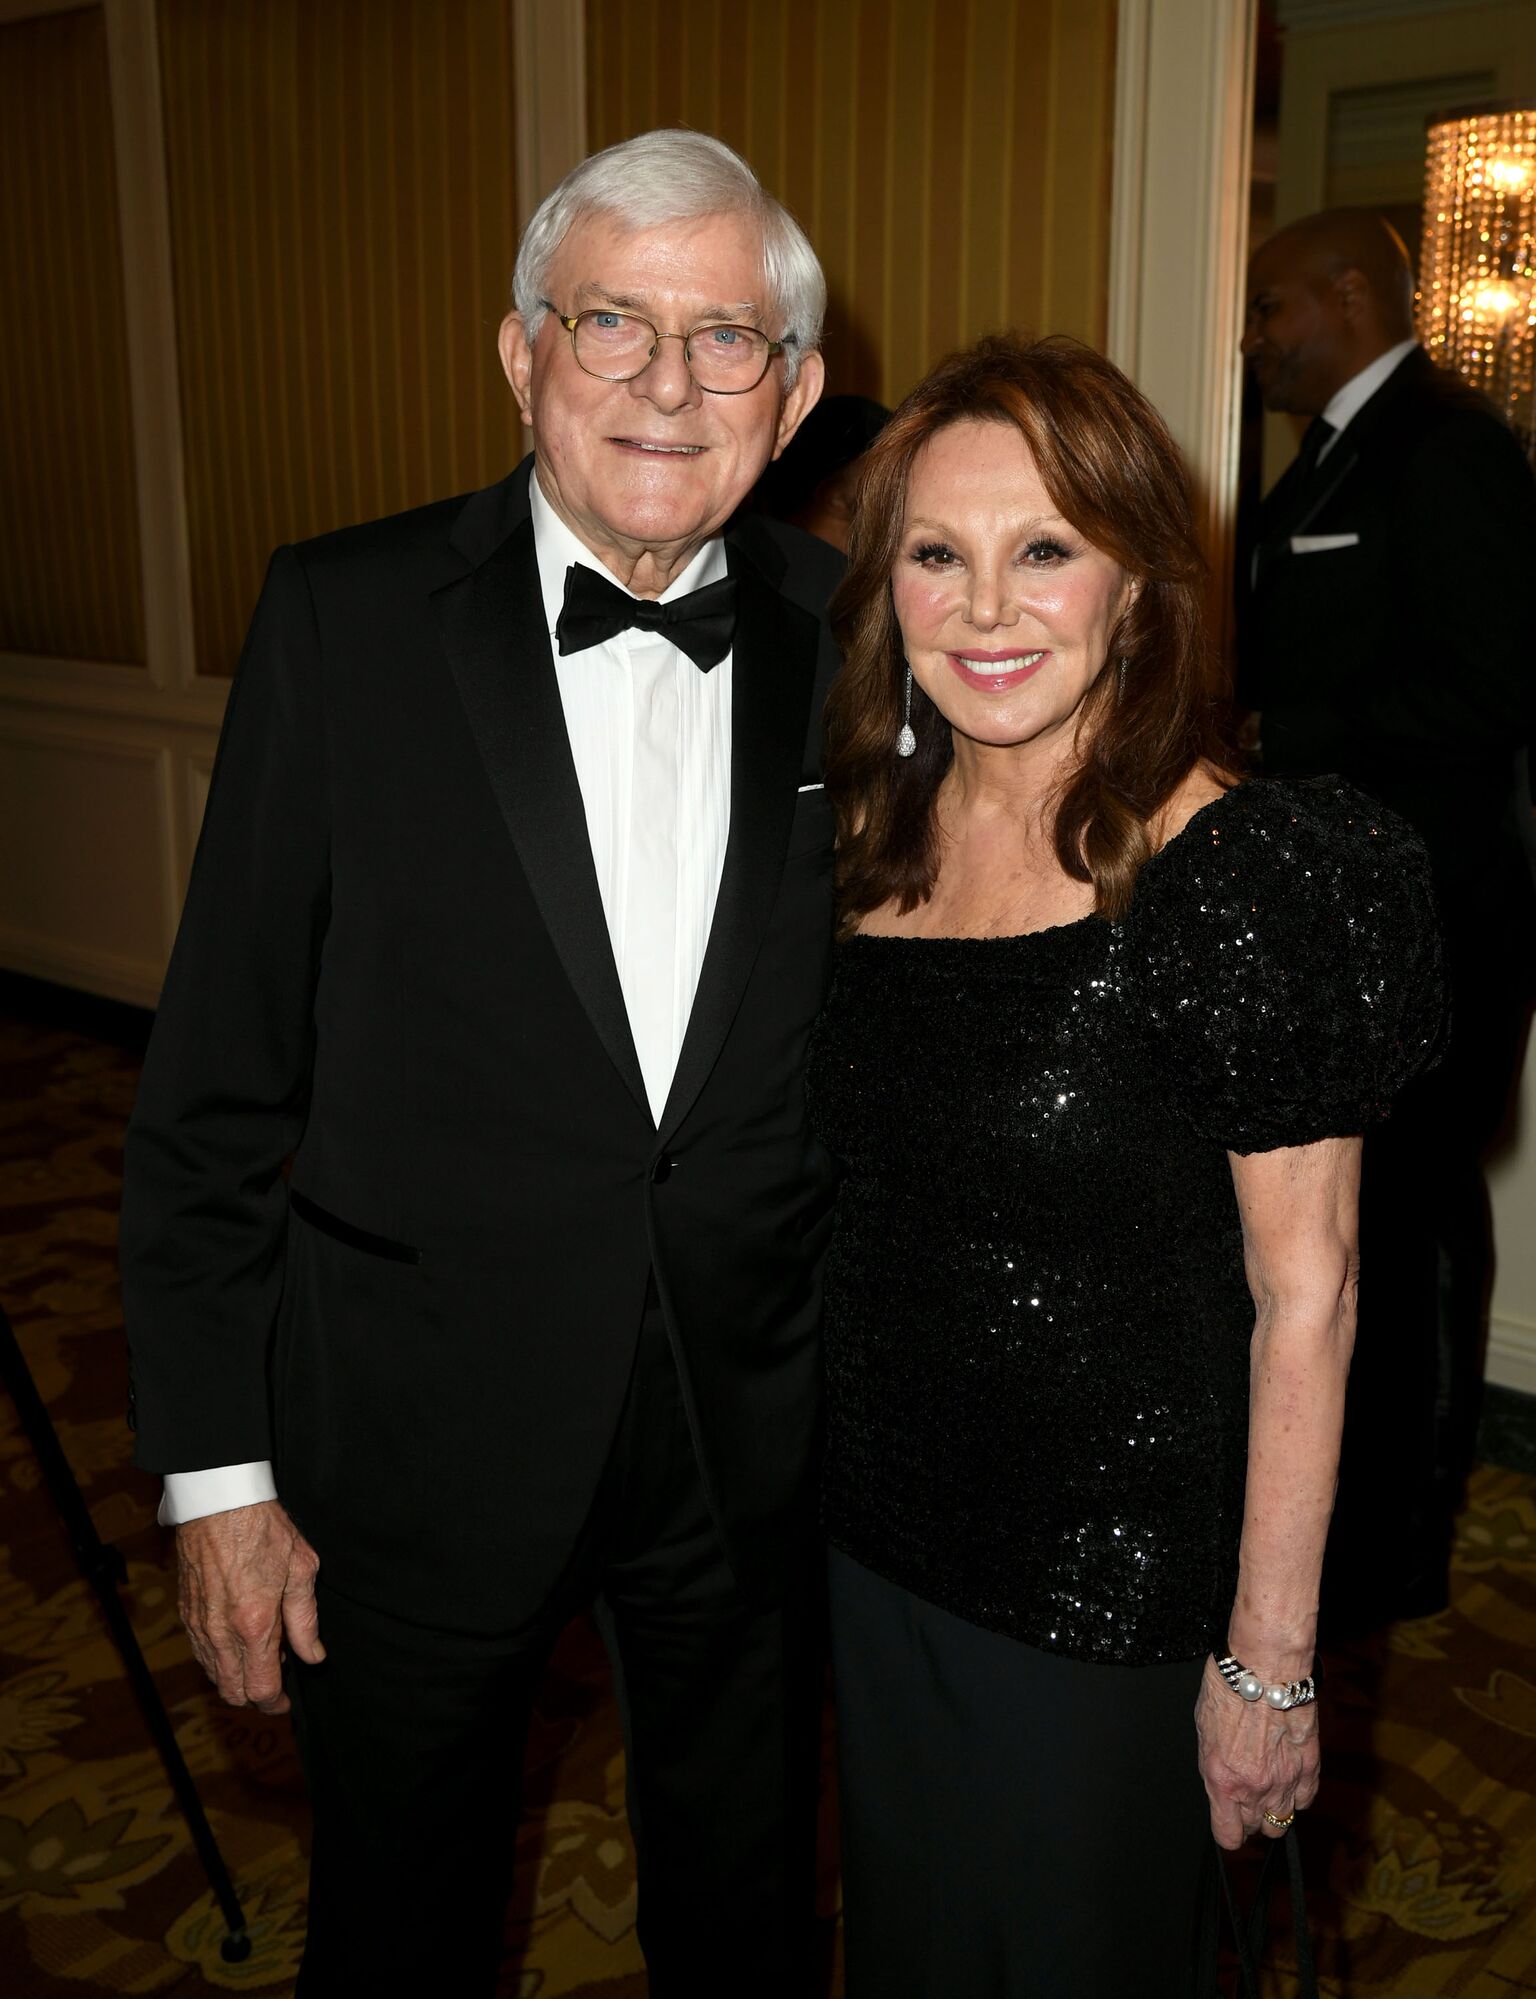 Phil Donahue (L) and Marlo Thomas arrive at the American Icon Awards at the Beverly Wilshire Four Seasons Hotel  | Getty Images